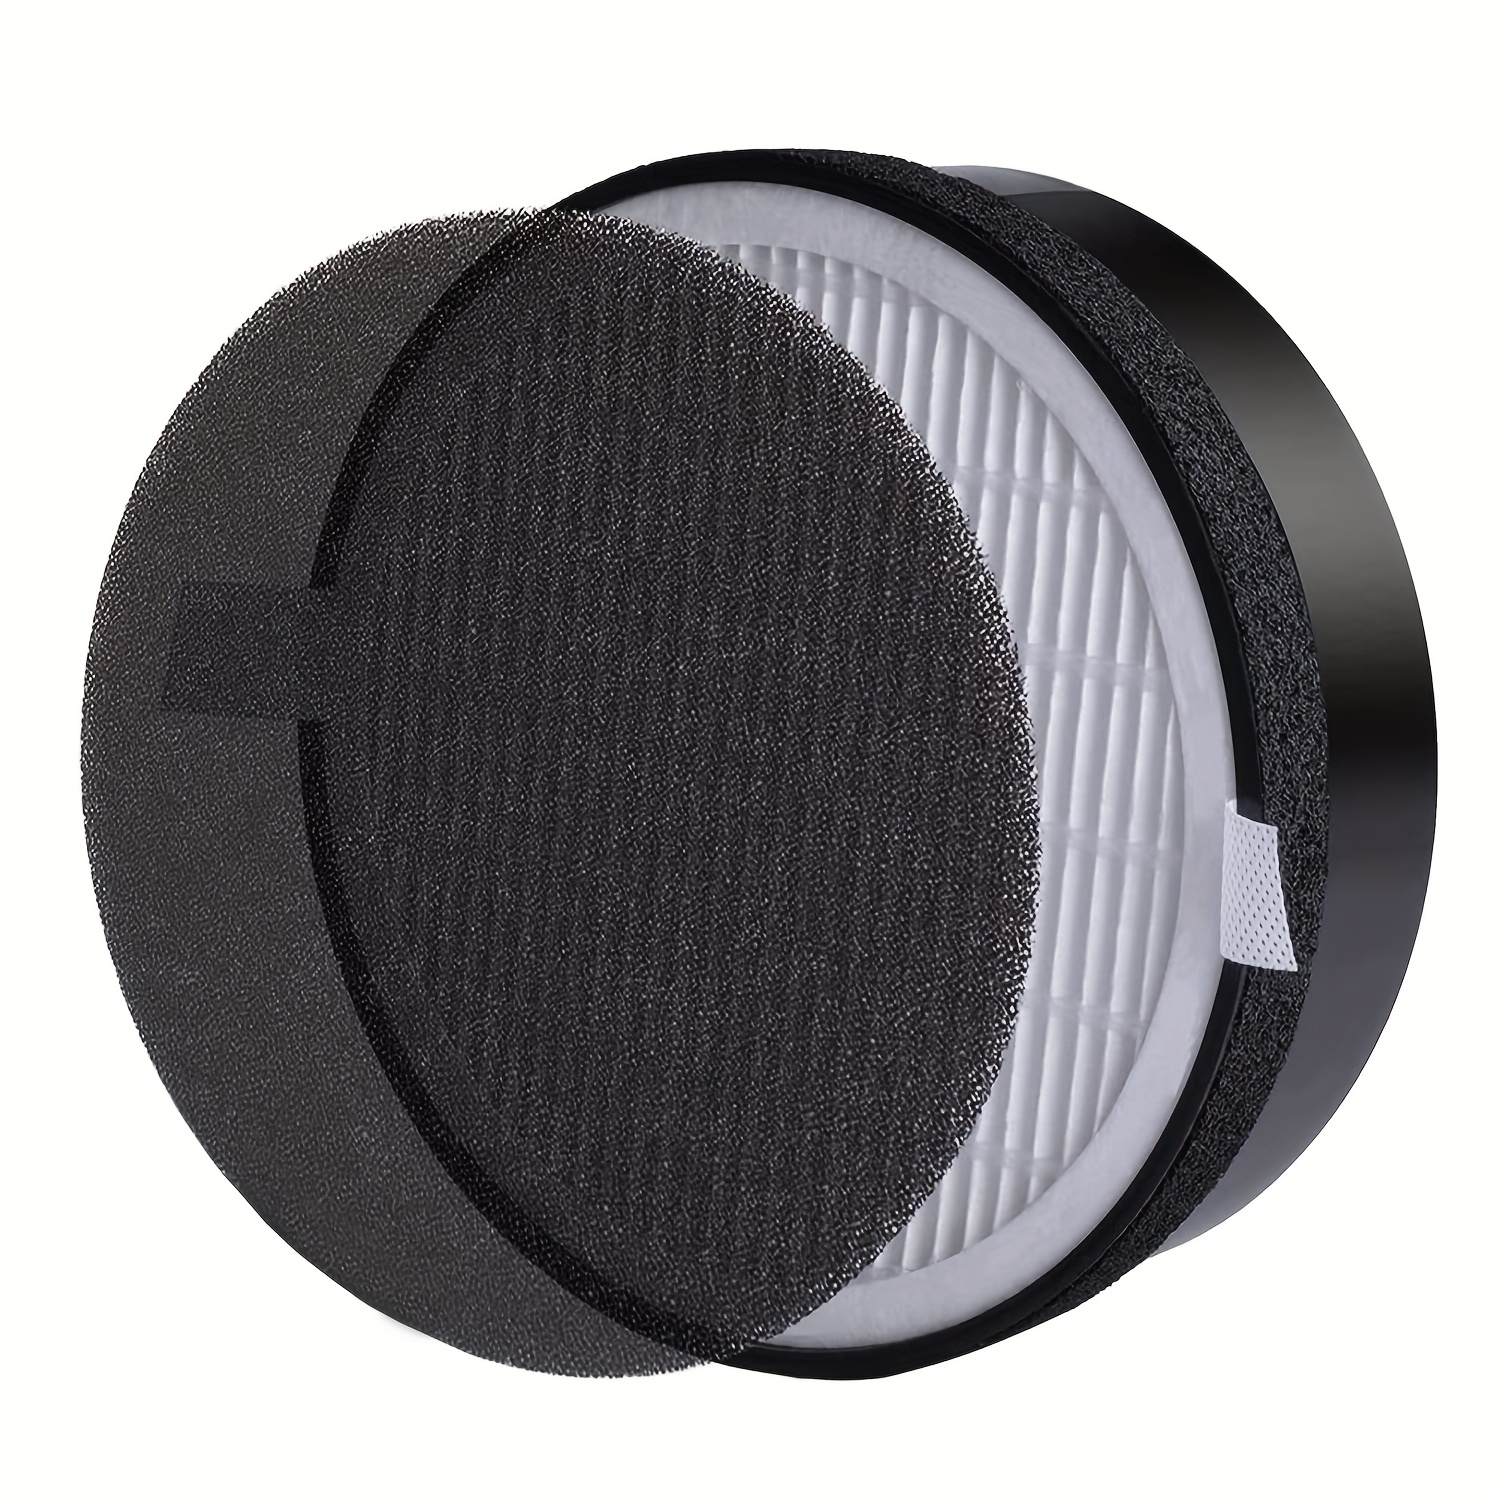 REPLACEMENT FILTER FOR Levoit Air Purifier LV-H132 True HEPA